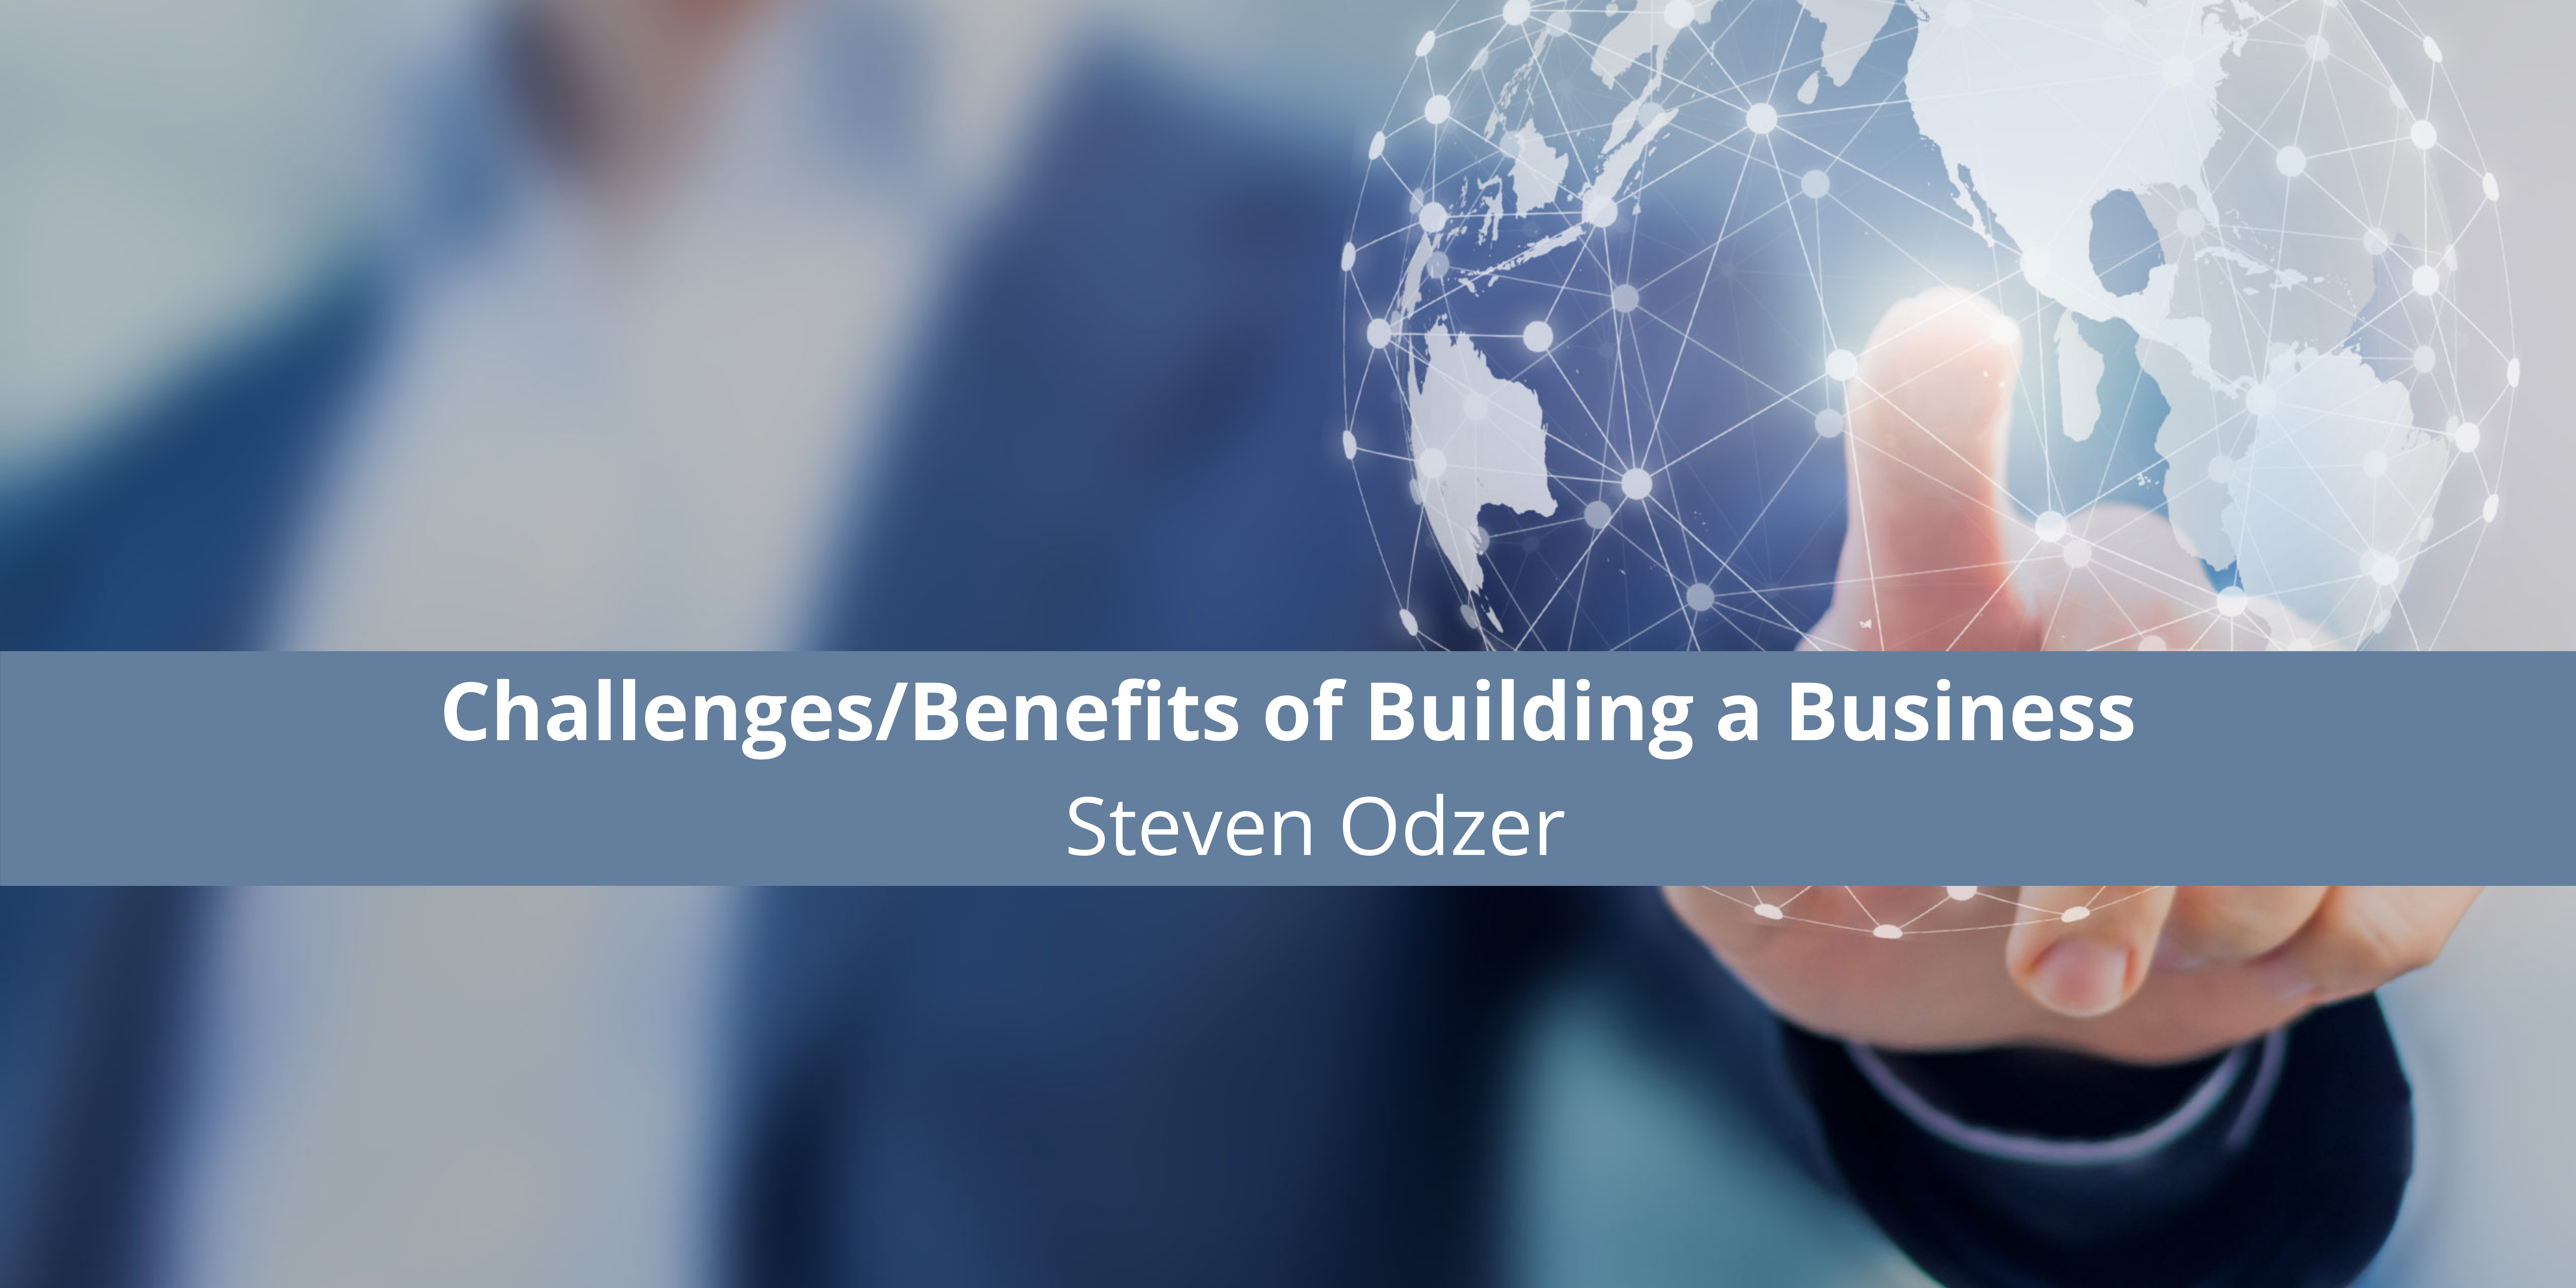 The Rewards of Entrepreneurship: Serial Business Owner/Entrepreneur Steven Odzer Examines the Challenges/Benefits of Building a Business